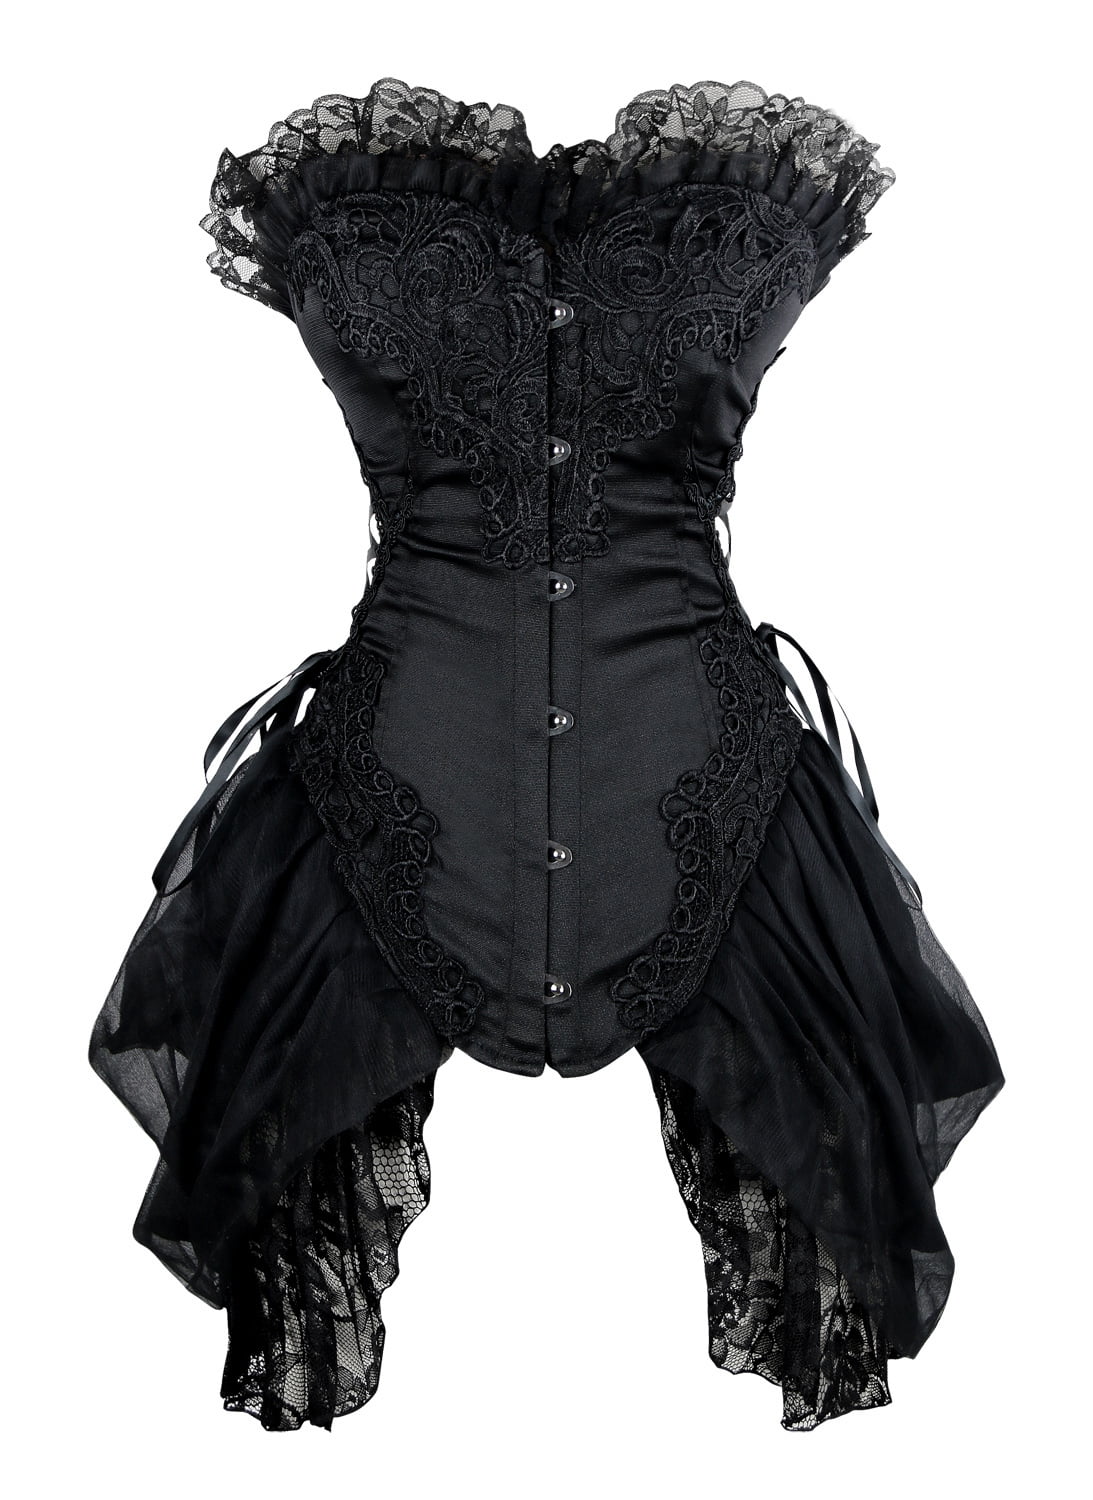 Grebrafan Gothic Striped Corset Push up Bustier with Multi Layer lace Skirt